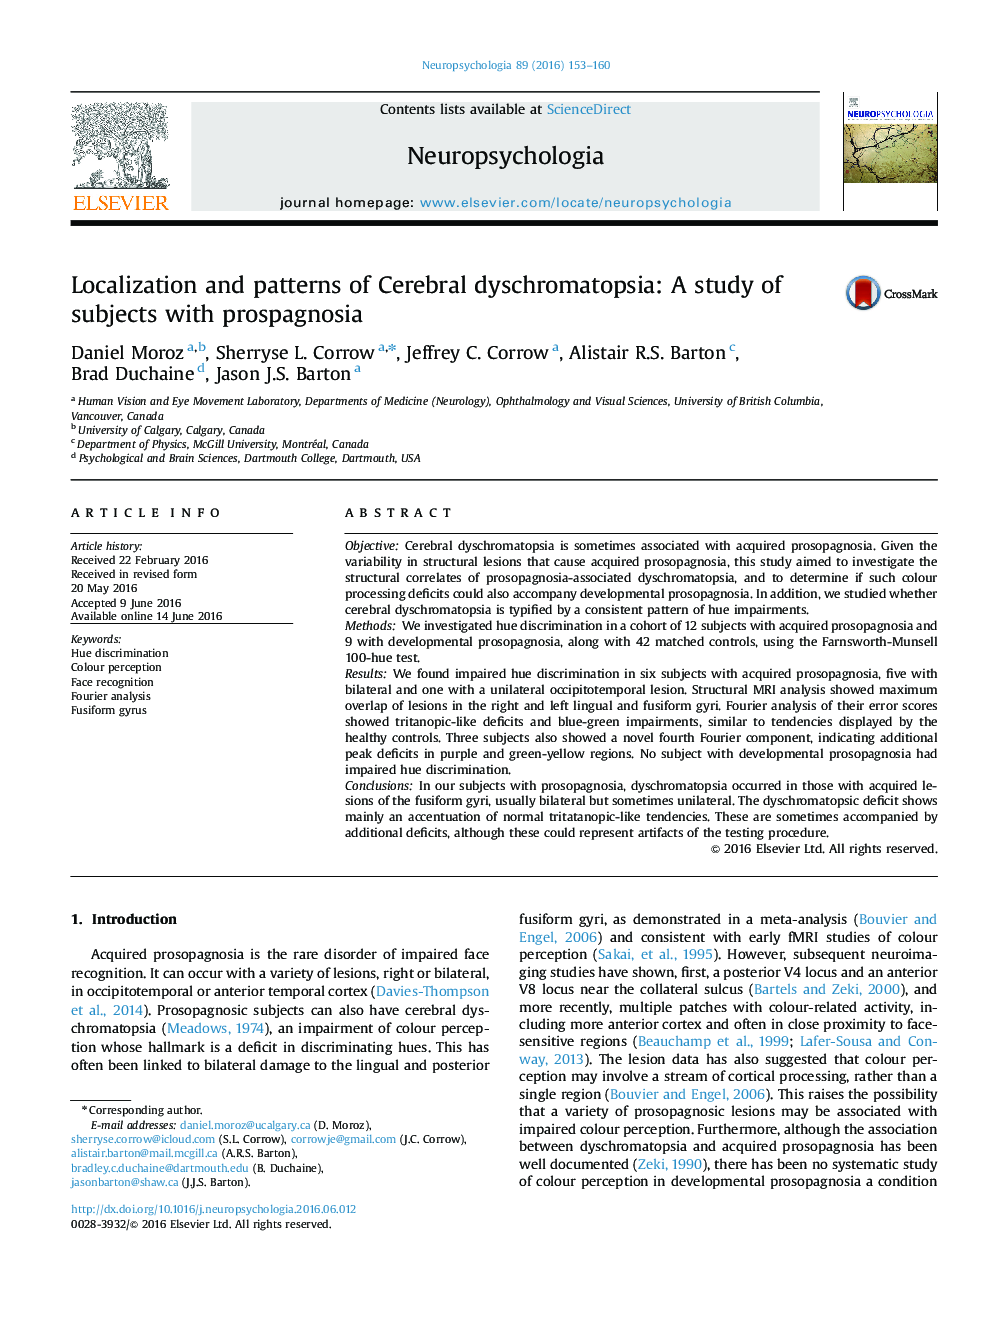 Localization and patterns of Cerebral dyschromatopsia: A study of subjects with prospagnosia